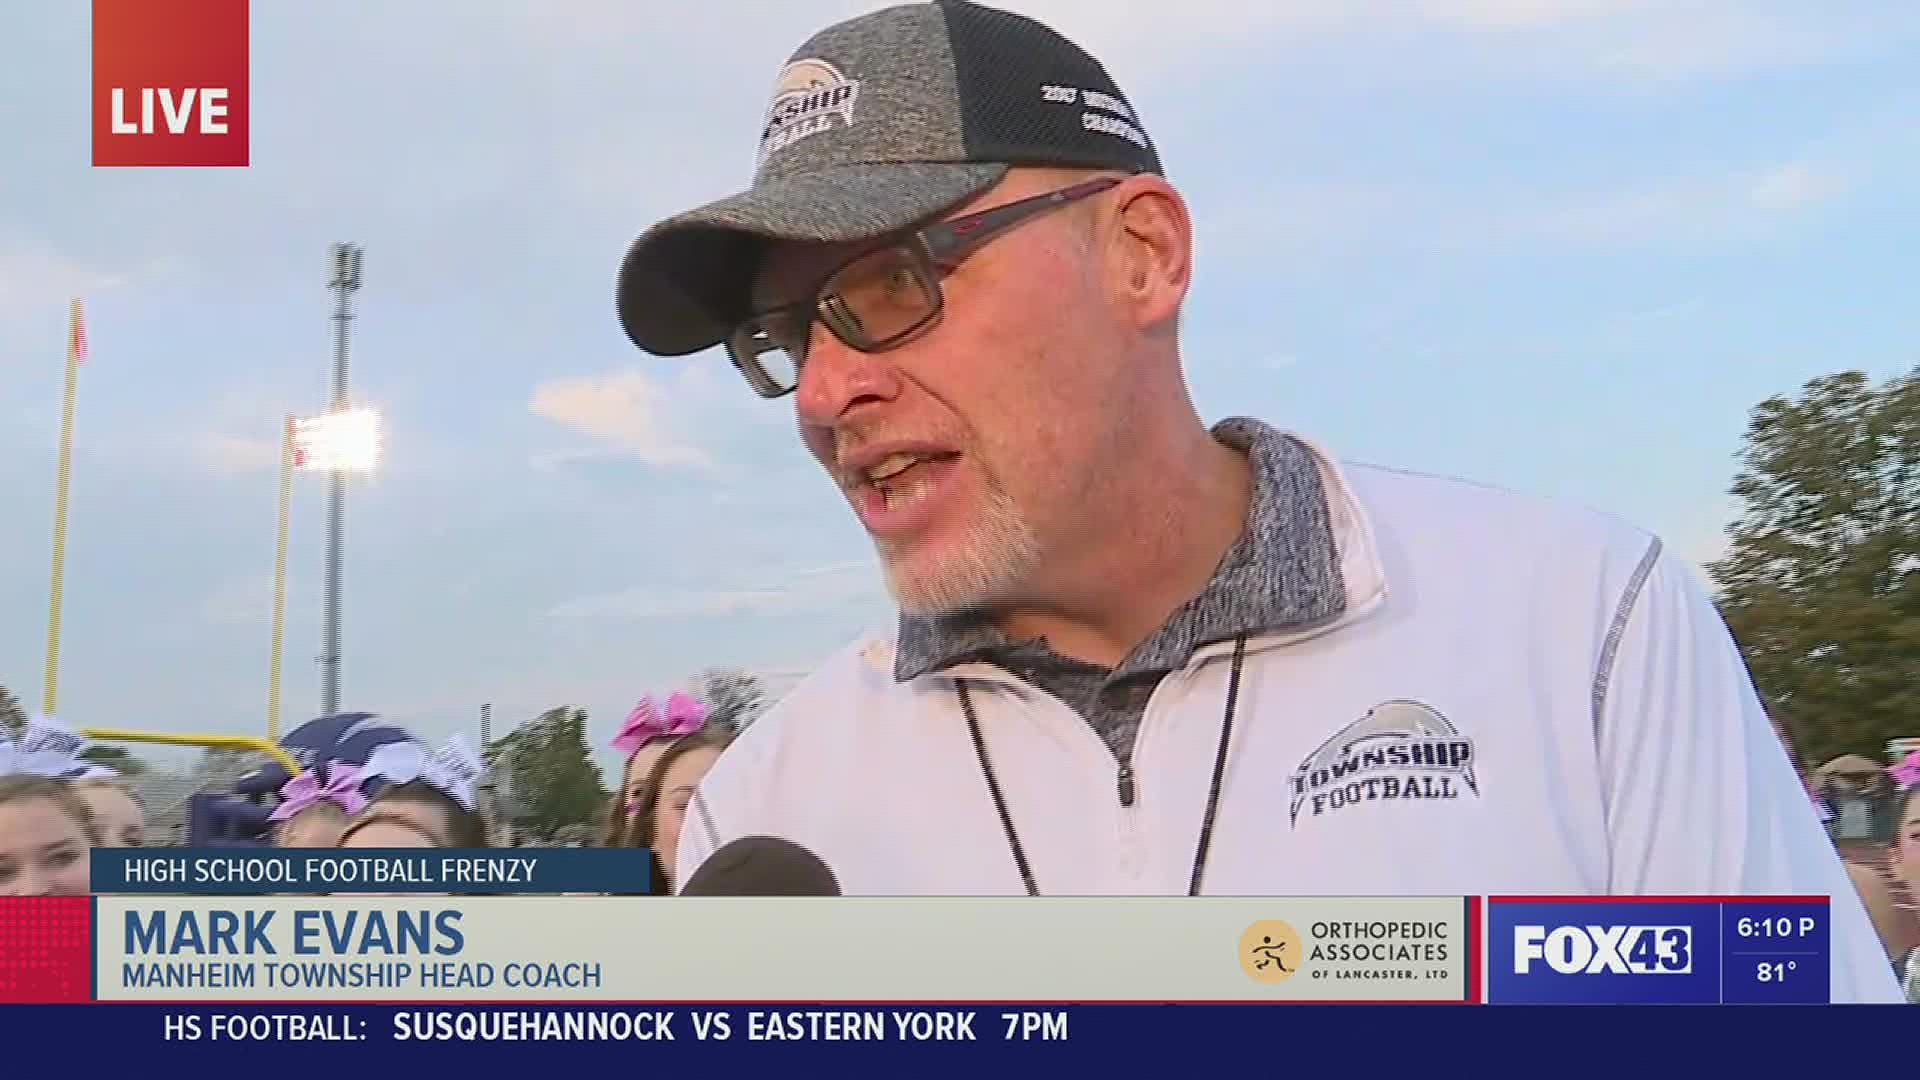 Week 8 Game of the Week interview with Manheim Township head coach, Mark Evans.